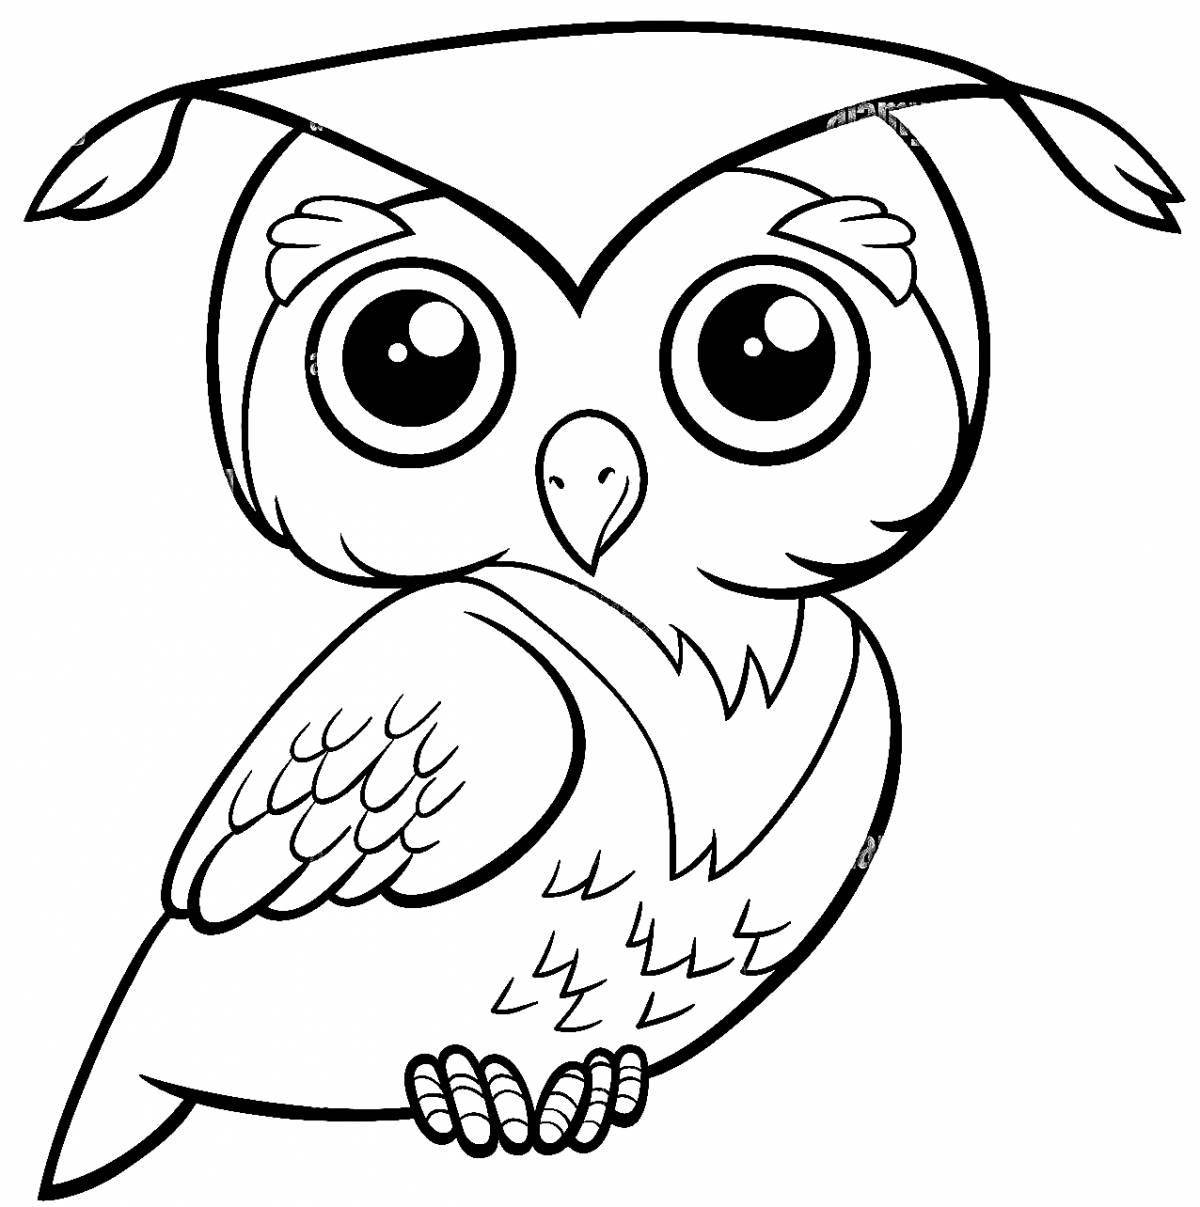 Fancy smart owl coloring book for kids